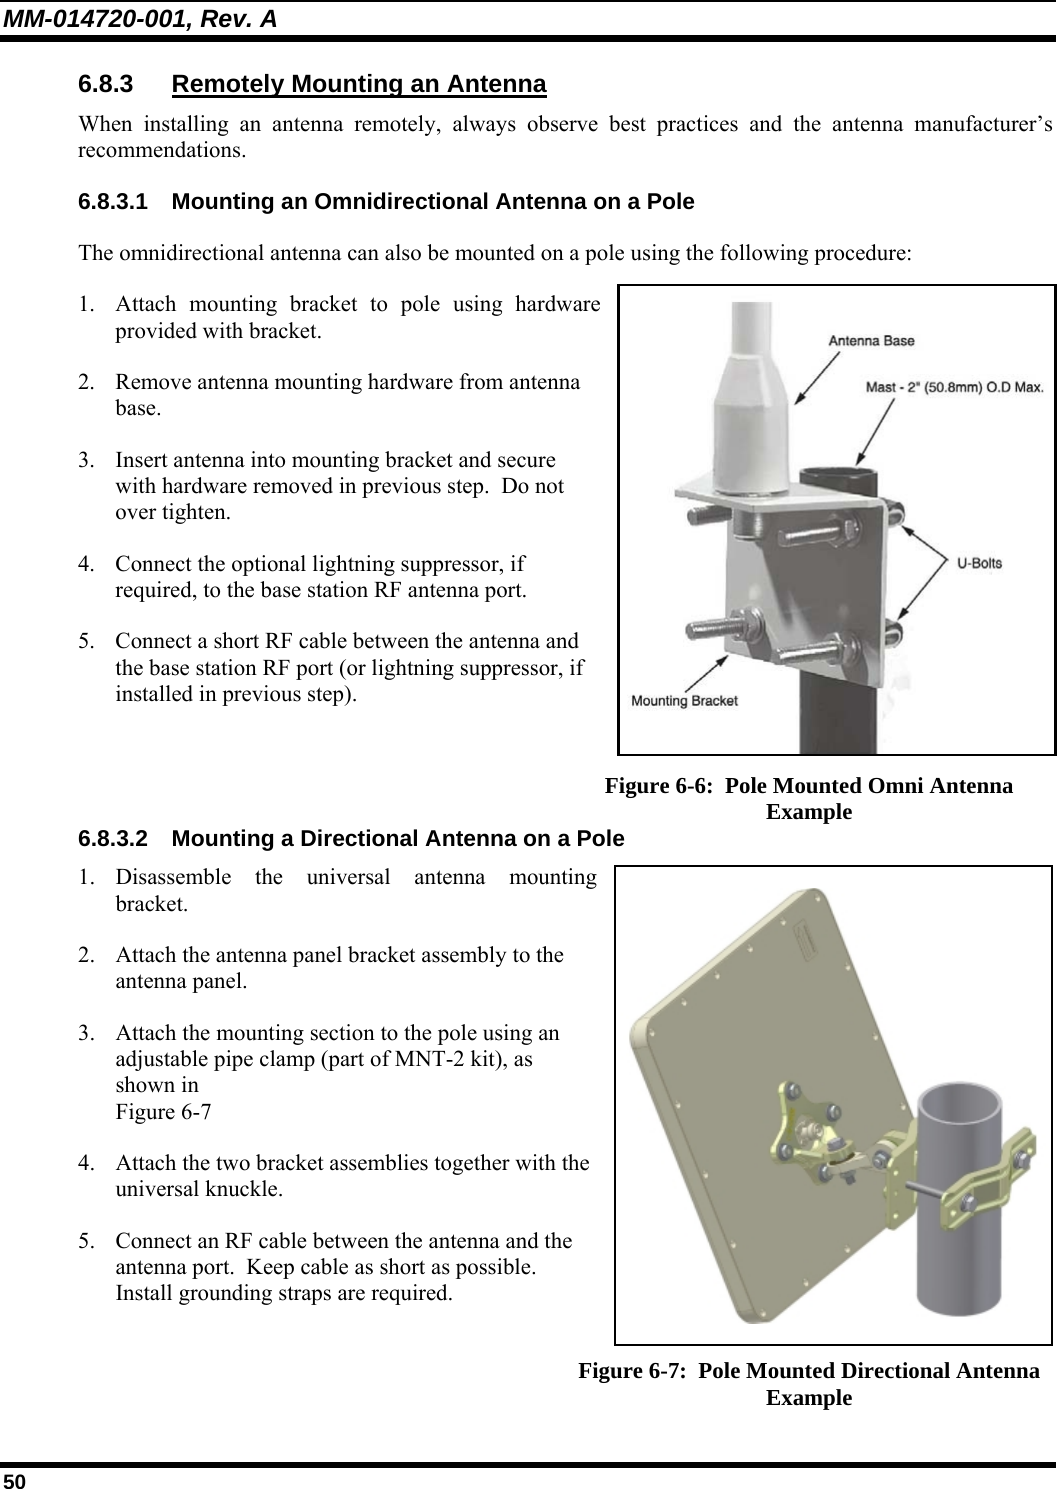 MM-014720-001, Rev. A 50 6.8.3 Remotely Mounting an Antenna When installing an antenna remotely, always observe best practices and the antenna manufacturer’s recommendations. 6.8.3.1  Mounting an Omnidirectional Antenna on a Pole The omnidirectional antenna can also be mounted on a pole using the following procedure: 1. Attach mounting bracket to pole using hardware provided with bracket. 2. Remove antenna mounting hardware from antenna base. 3. Insert antenna into mounting bracket and secure with hardware removed in previous step.  Do not over tighten. 4. Connect the optional lightning suppressor, if required, to the base station RF antenna port. 5. Connect a short RF cable between the antenna and the base station RF port (or lightning suppressor, if installed in previous step).    Figure 6-6:  Pole Mounted Omni Antenna Example 6.8.3.2  Mounting a Directional Antenna on a Pole 1. Disassemble the universal antenna mounting bracket. 2. Attach the antenna panel bracket assembly to the antenna panel. 3. Attach the mounting section to the pole using an adjustable pipe clamp (part of MNT-2 kit), as shown in  Figure 6-7 4. Attach the two bracket assemblies together with the universal knuckle. 5. Connect an RF cable between the antenna and the antenna port.  Keep cable as short as possible.  Install grounding straps are required.  Figure 6-7:  Pole Mounted Directional Antenna Example 